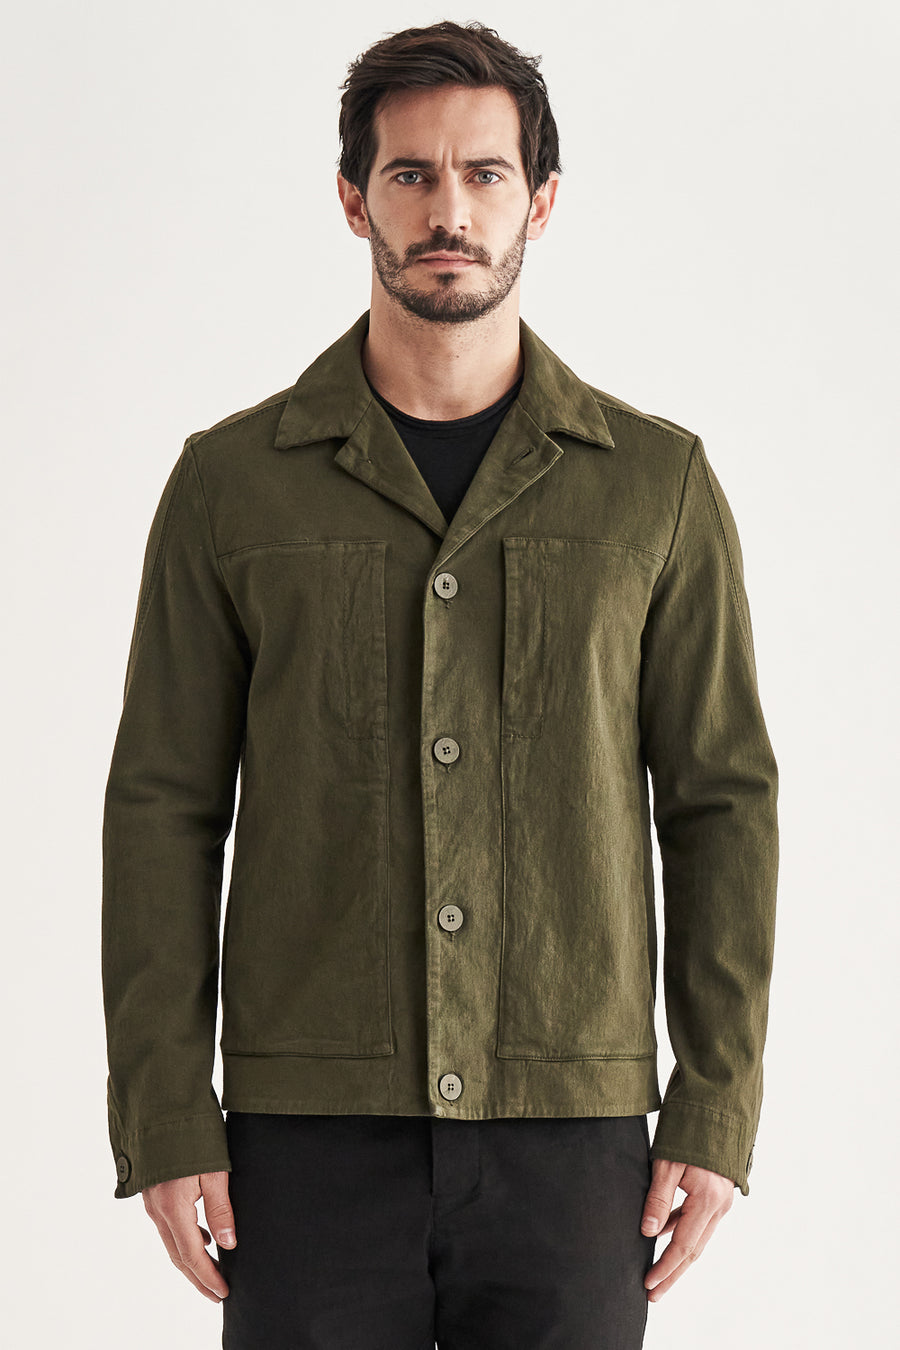 Buy the Transit Cotton/Wool Overshirt in Khaki at Intro. Spend £50 for free UK delivery. Official stockists. We ship worldwide.